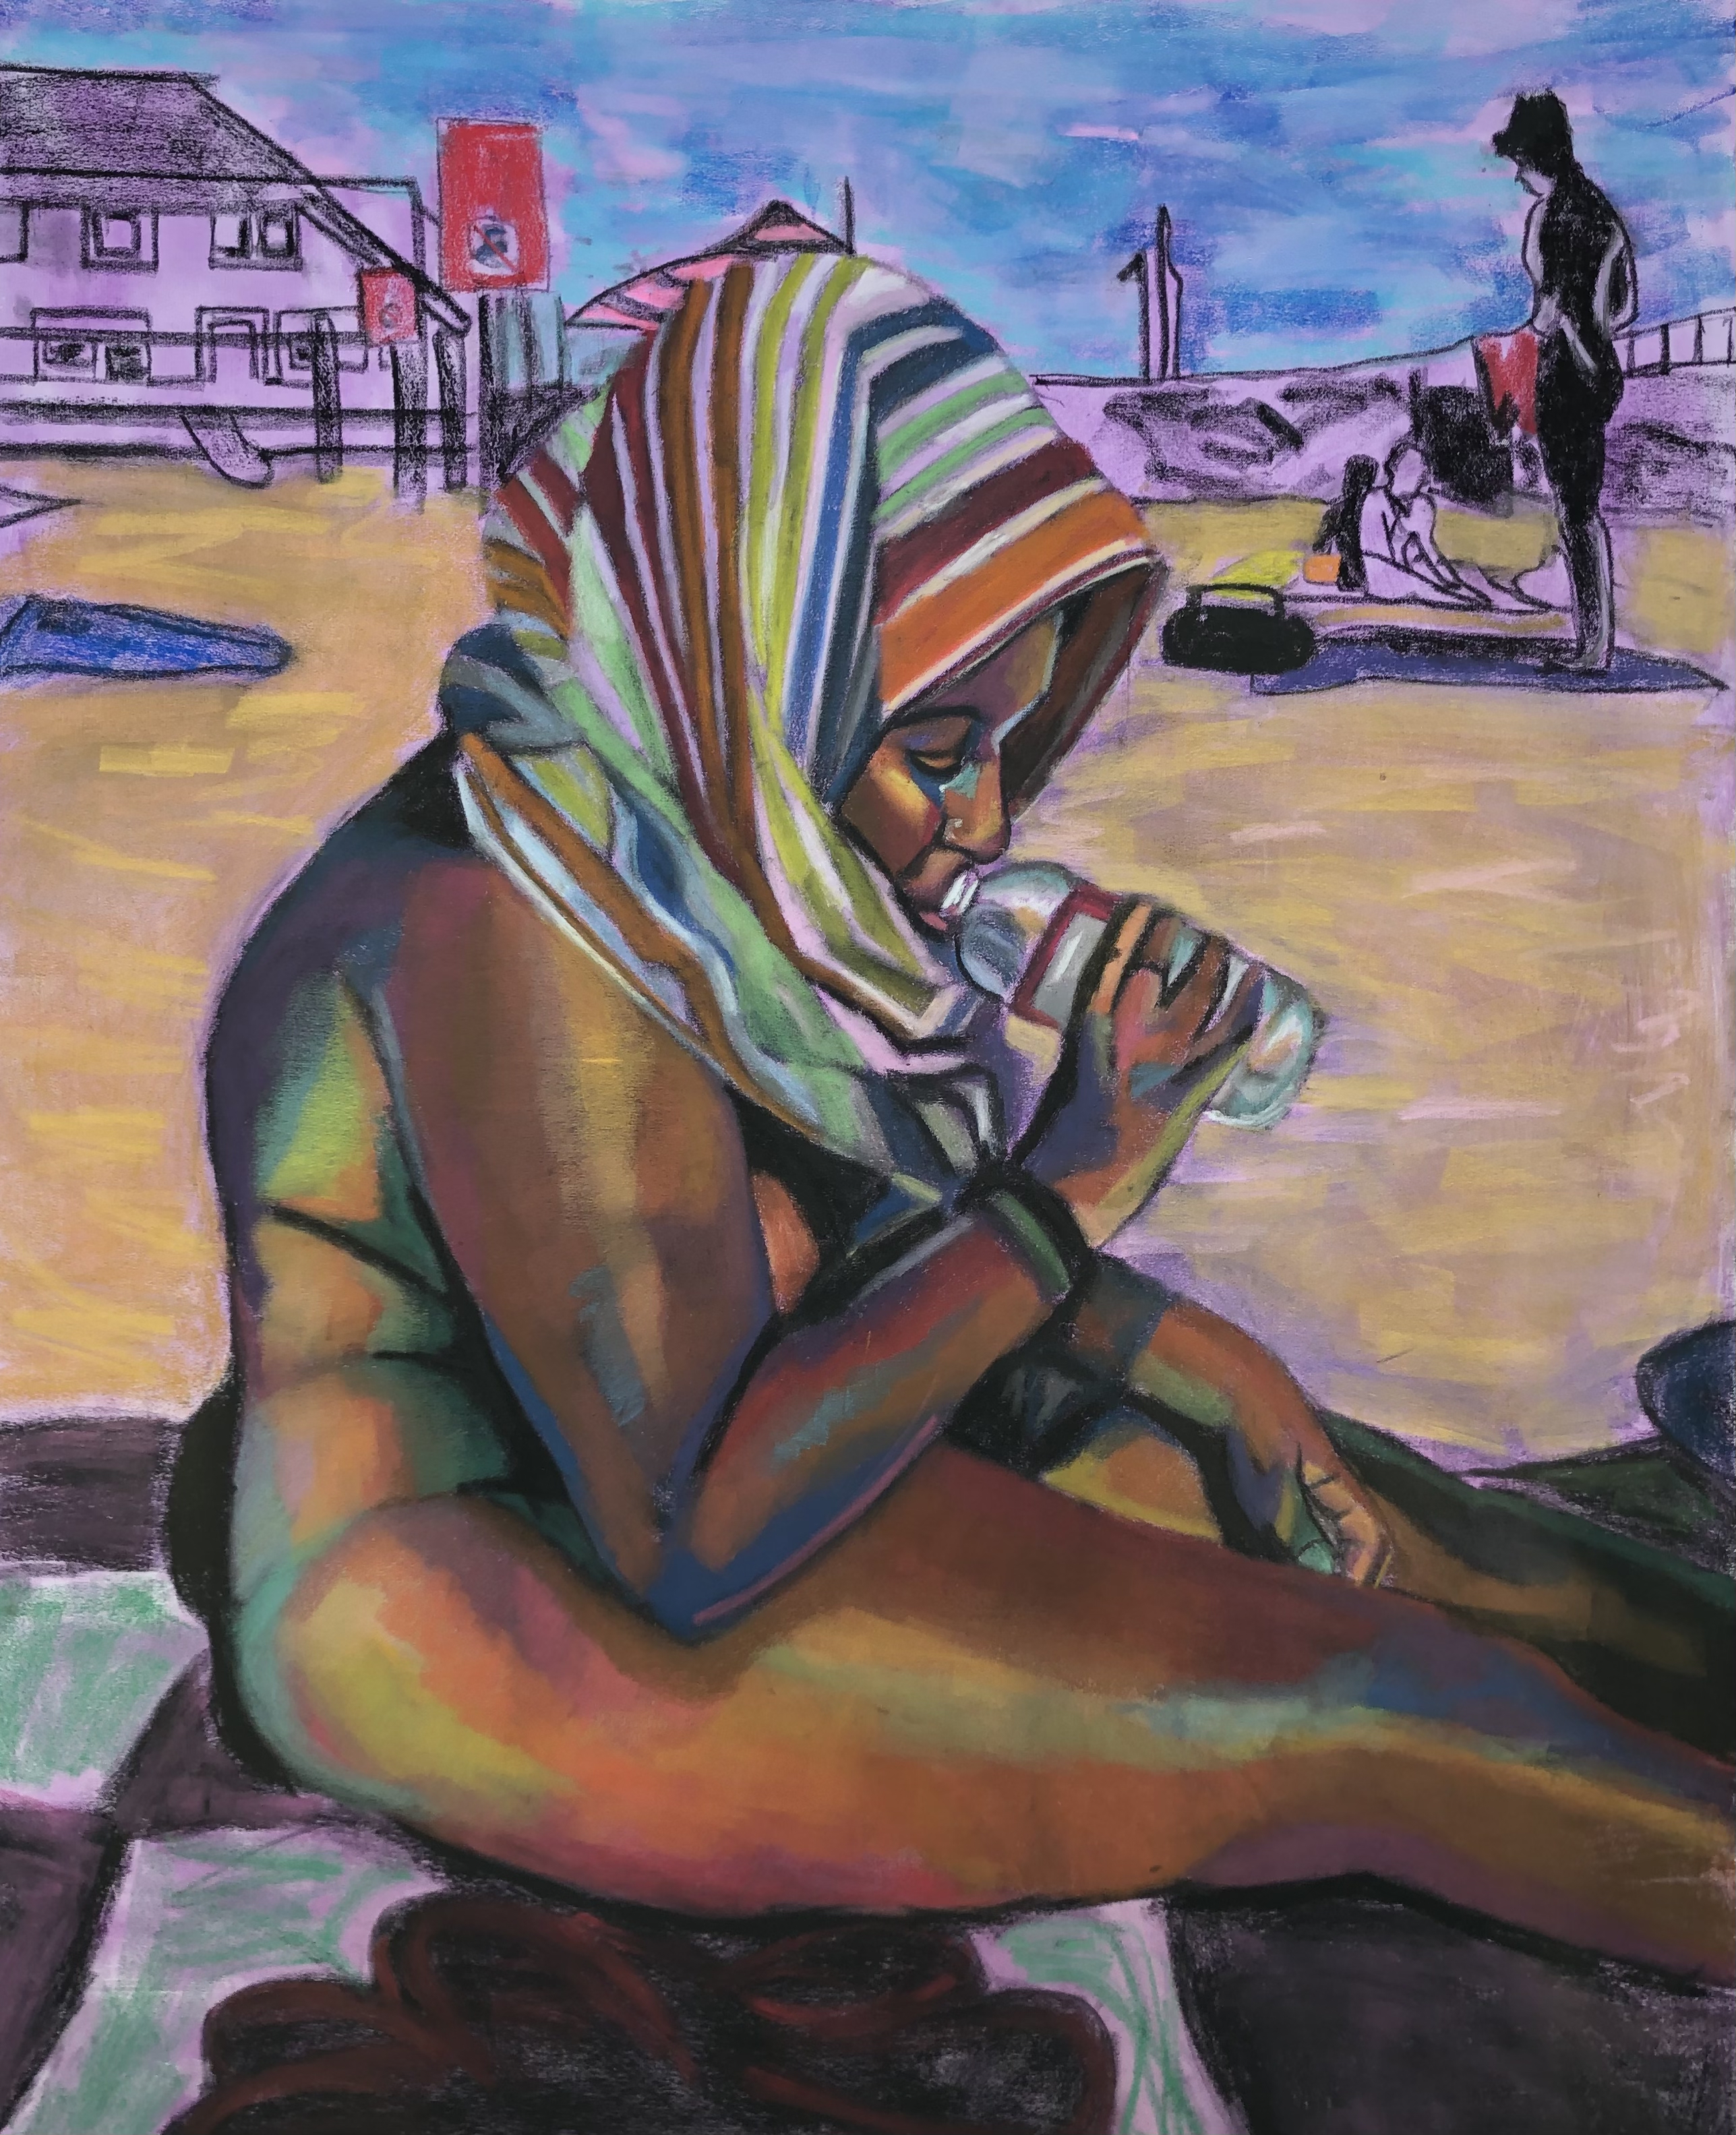 Artist sitting on the beach with a towel wrapped on her head sipping from bottle